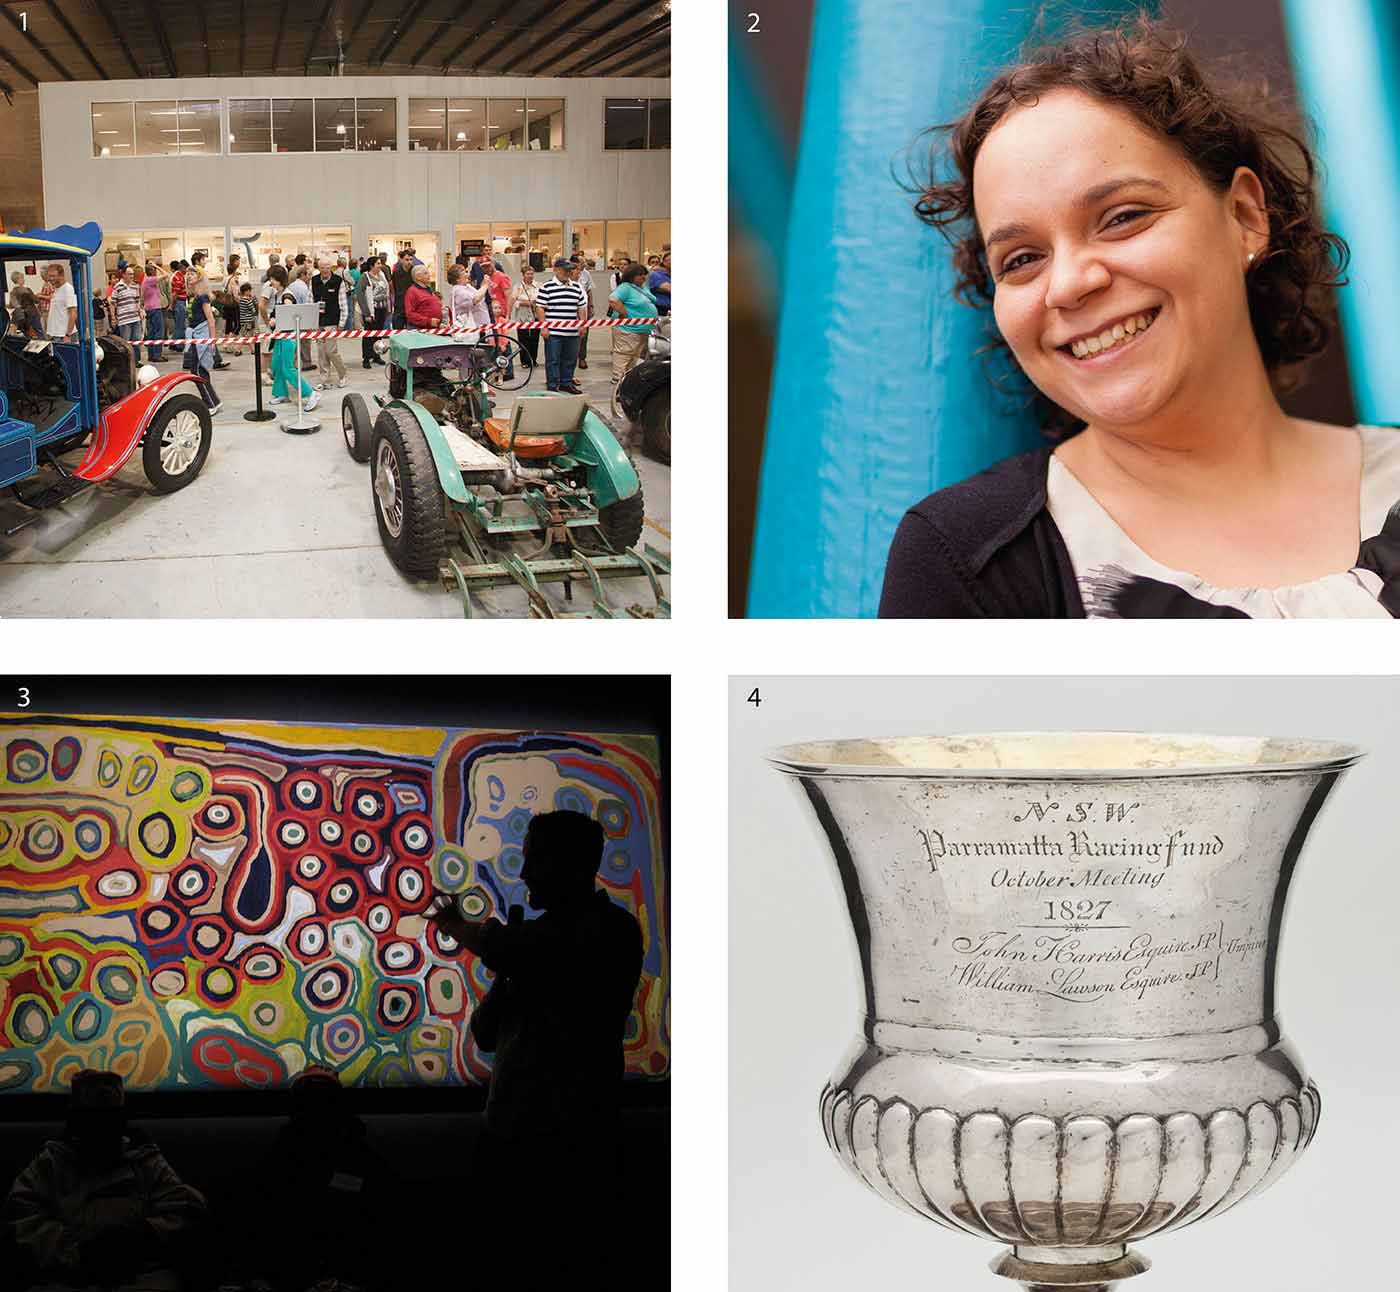 A compile of four roughly square-shaped photographs in a larger square. Top left, marked with a small '1', shows a crowd of people filing past two brighly painted vehicles at one of the Museum's storage and conservation areas. Top right, marked with a small '2' is a portrait of Indigenous cadet and Rhodes scholar Rebecca Richards. Bottom left, marked with a small '3' shows the silhouetted profile of a man standing to the right and gesturing with his hand towards a large, brightly-coloured painting from the 'Yiwarra Kuju' exhibition. Bottom right, marked with a small '4', shows the top section of a silver cup, engraved with the words 'NSW / Parramatta Racing Fund /October Meeting /1827'.